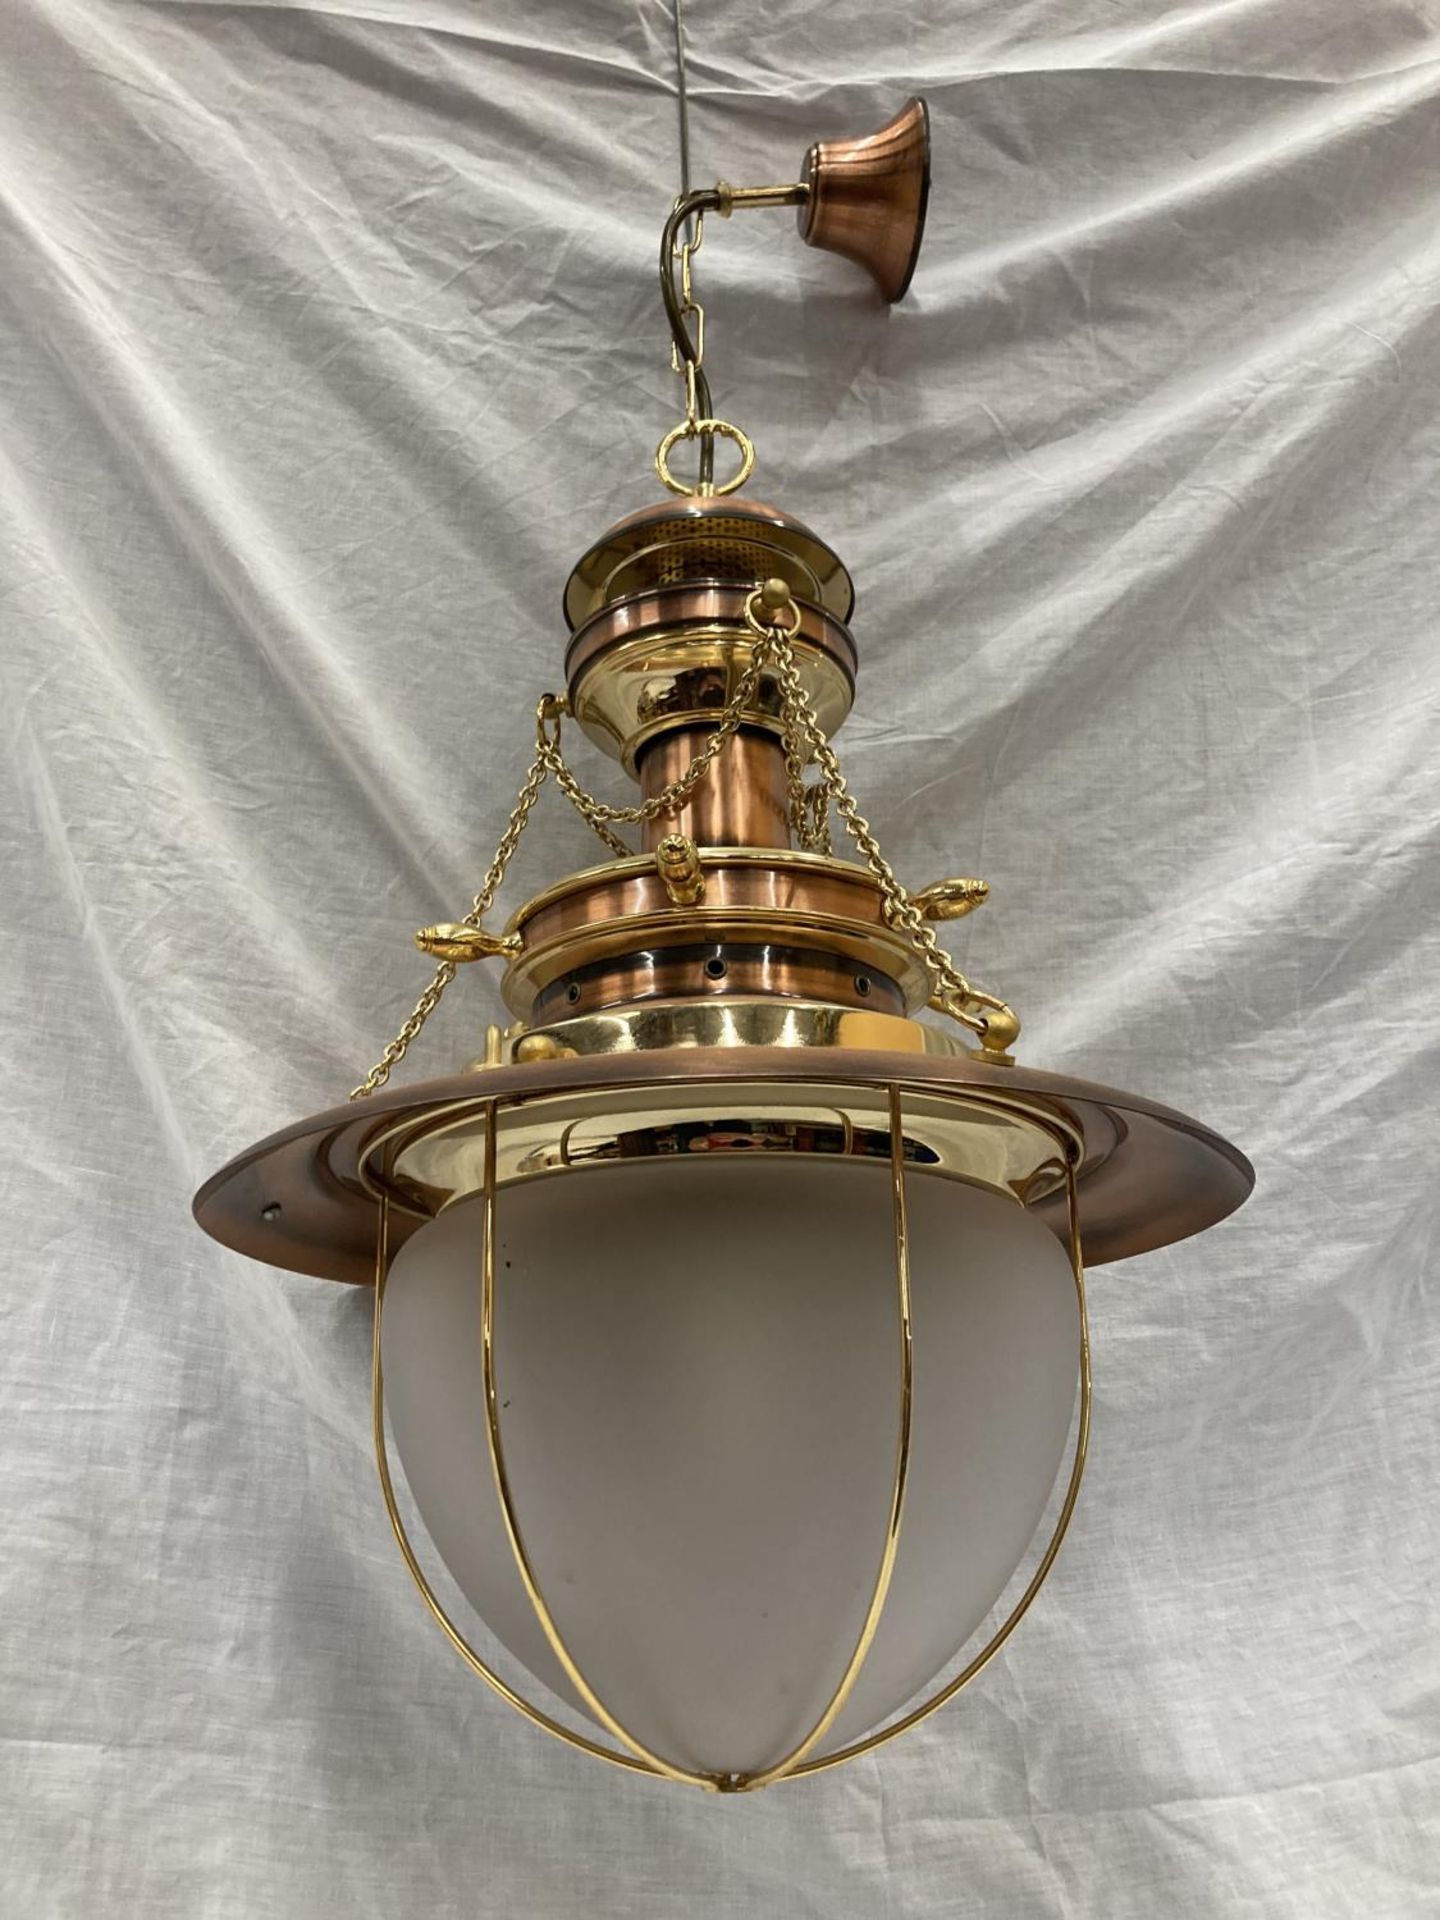 AN UNUSUAL BRASS AND COPPER PENDANT LIGHT WITH DOMED GLASS SHADE, SHIPS WHEEL DESIGN AND CHAINS - Image 4 of 5